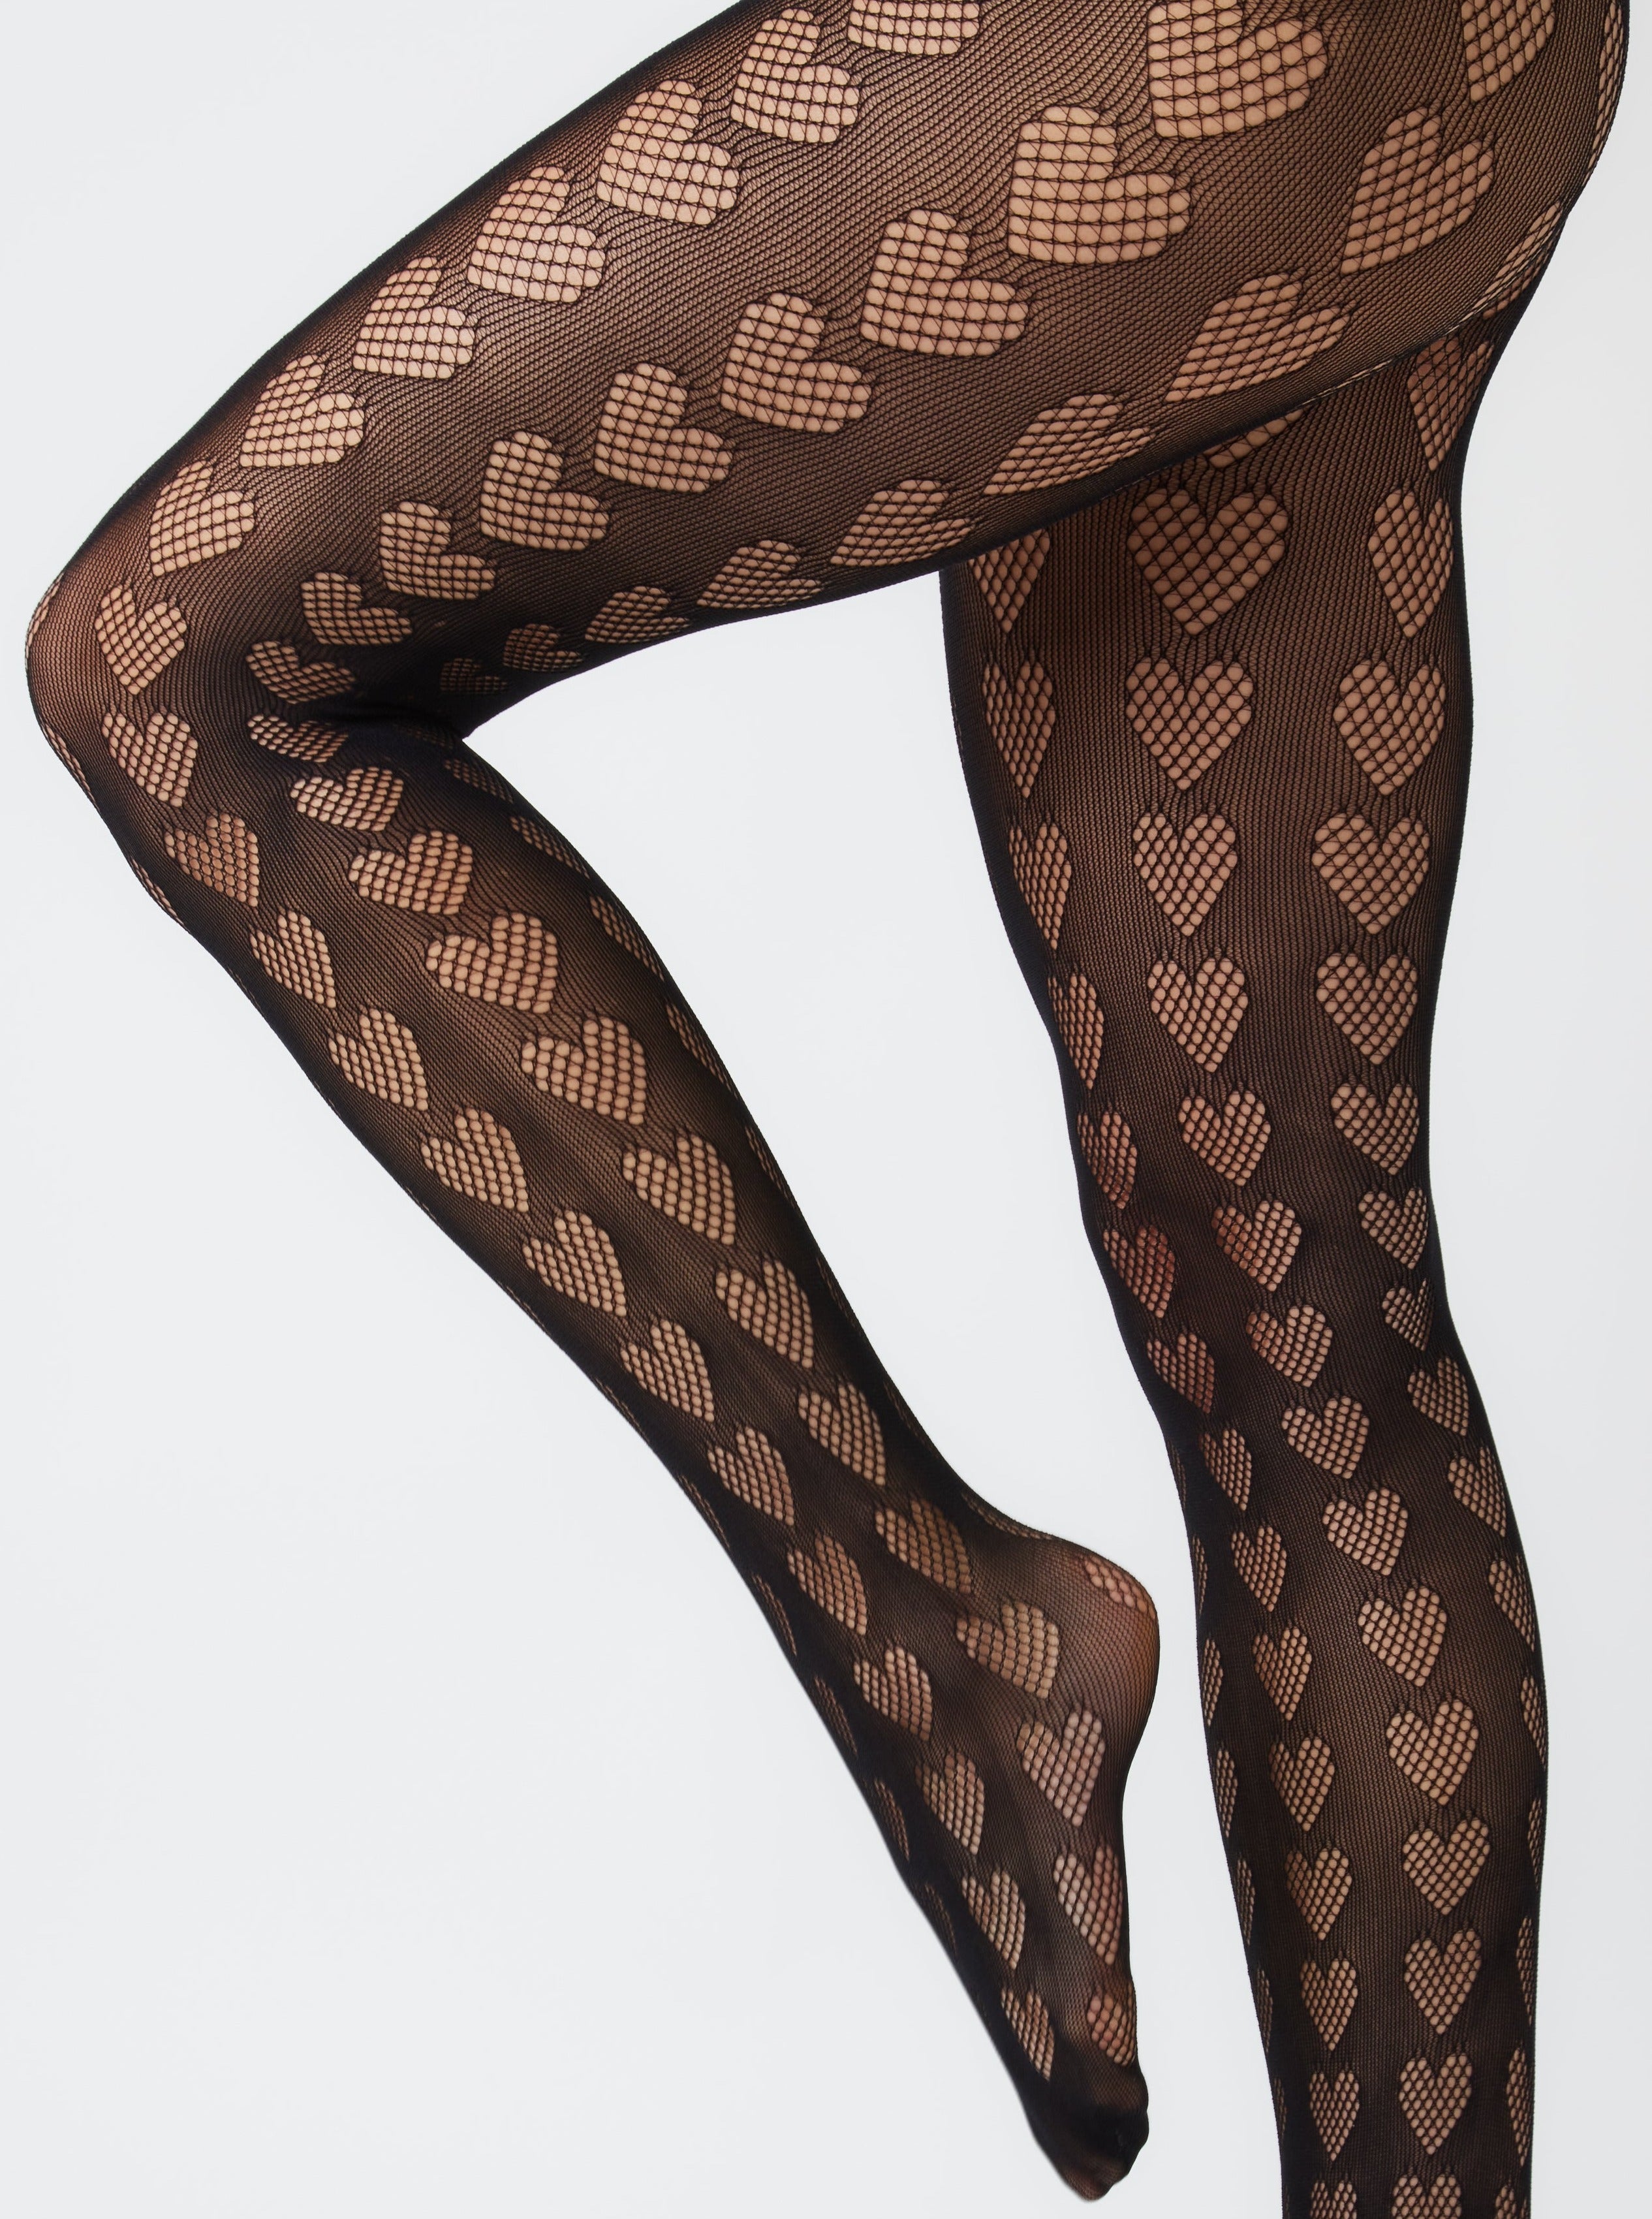 Heart Cut-Out Tights in Black | Hosiery | Autumn | Winter | Party | Occasion | Hearts | Fishnet | Festival | Women's Accessories | Whimsygoth | Gothic | E girl | Halloween | Costume | Barbie | Barbiecore | Cosplay | Soft e girl